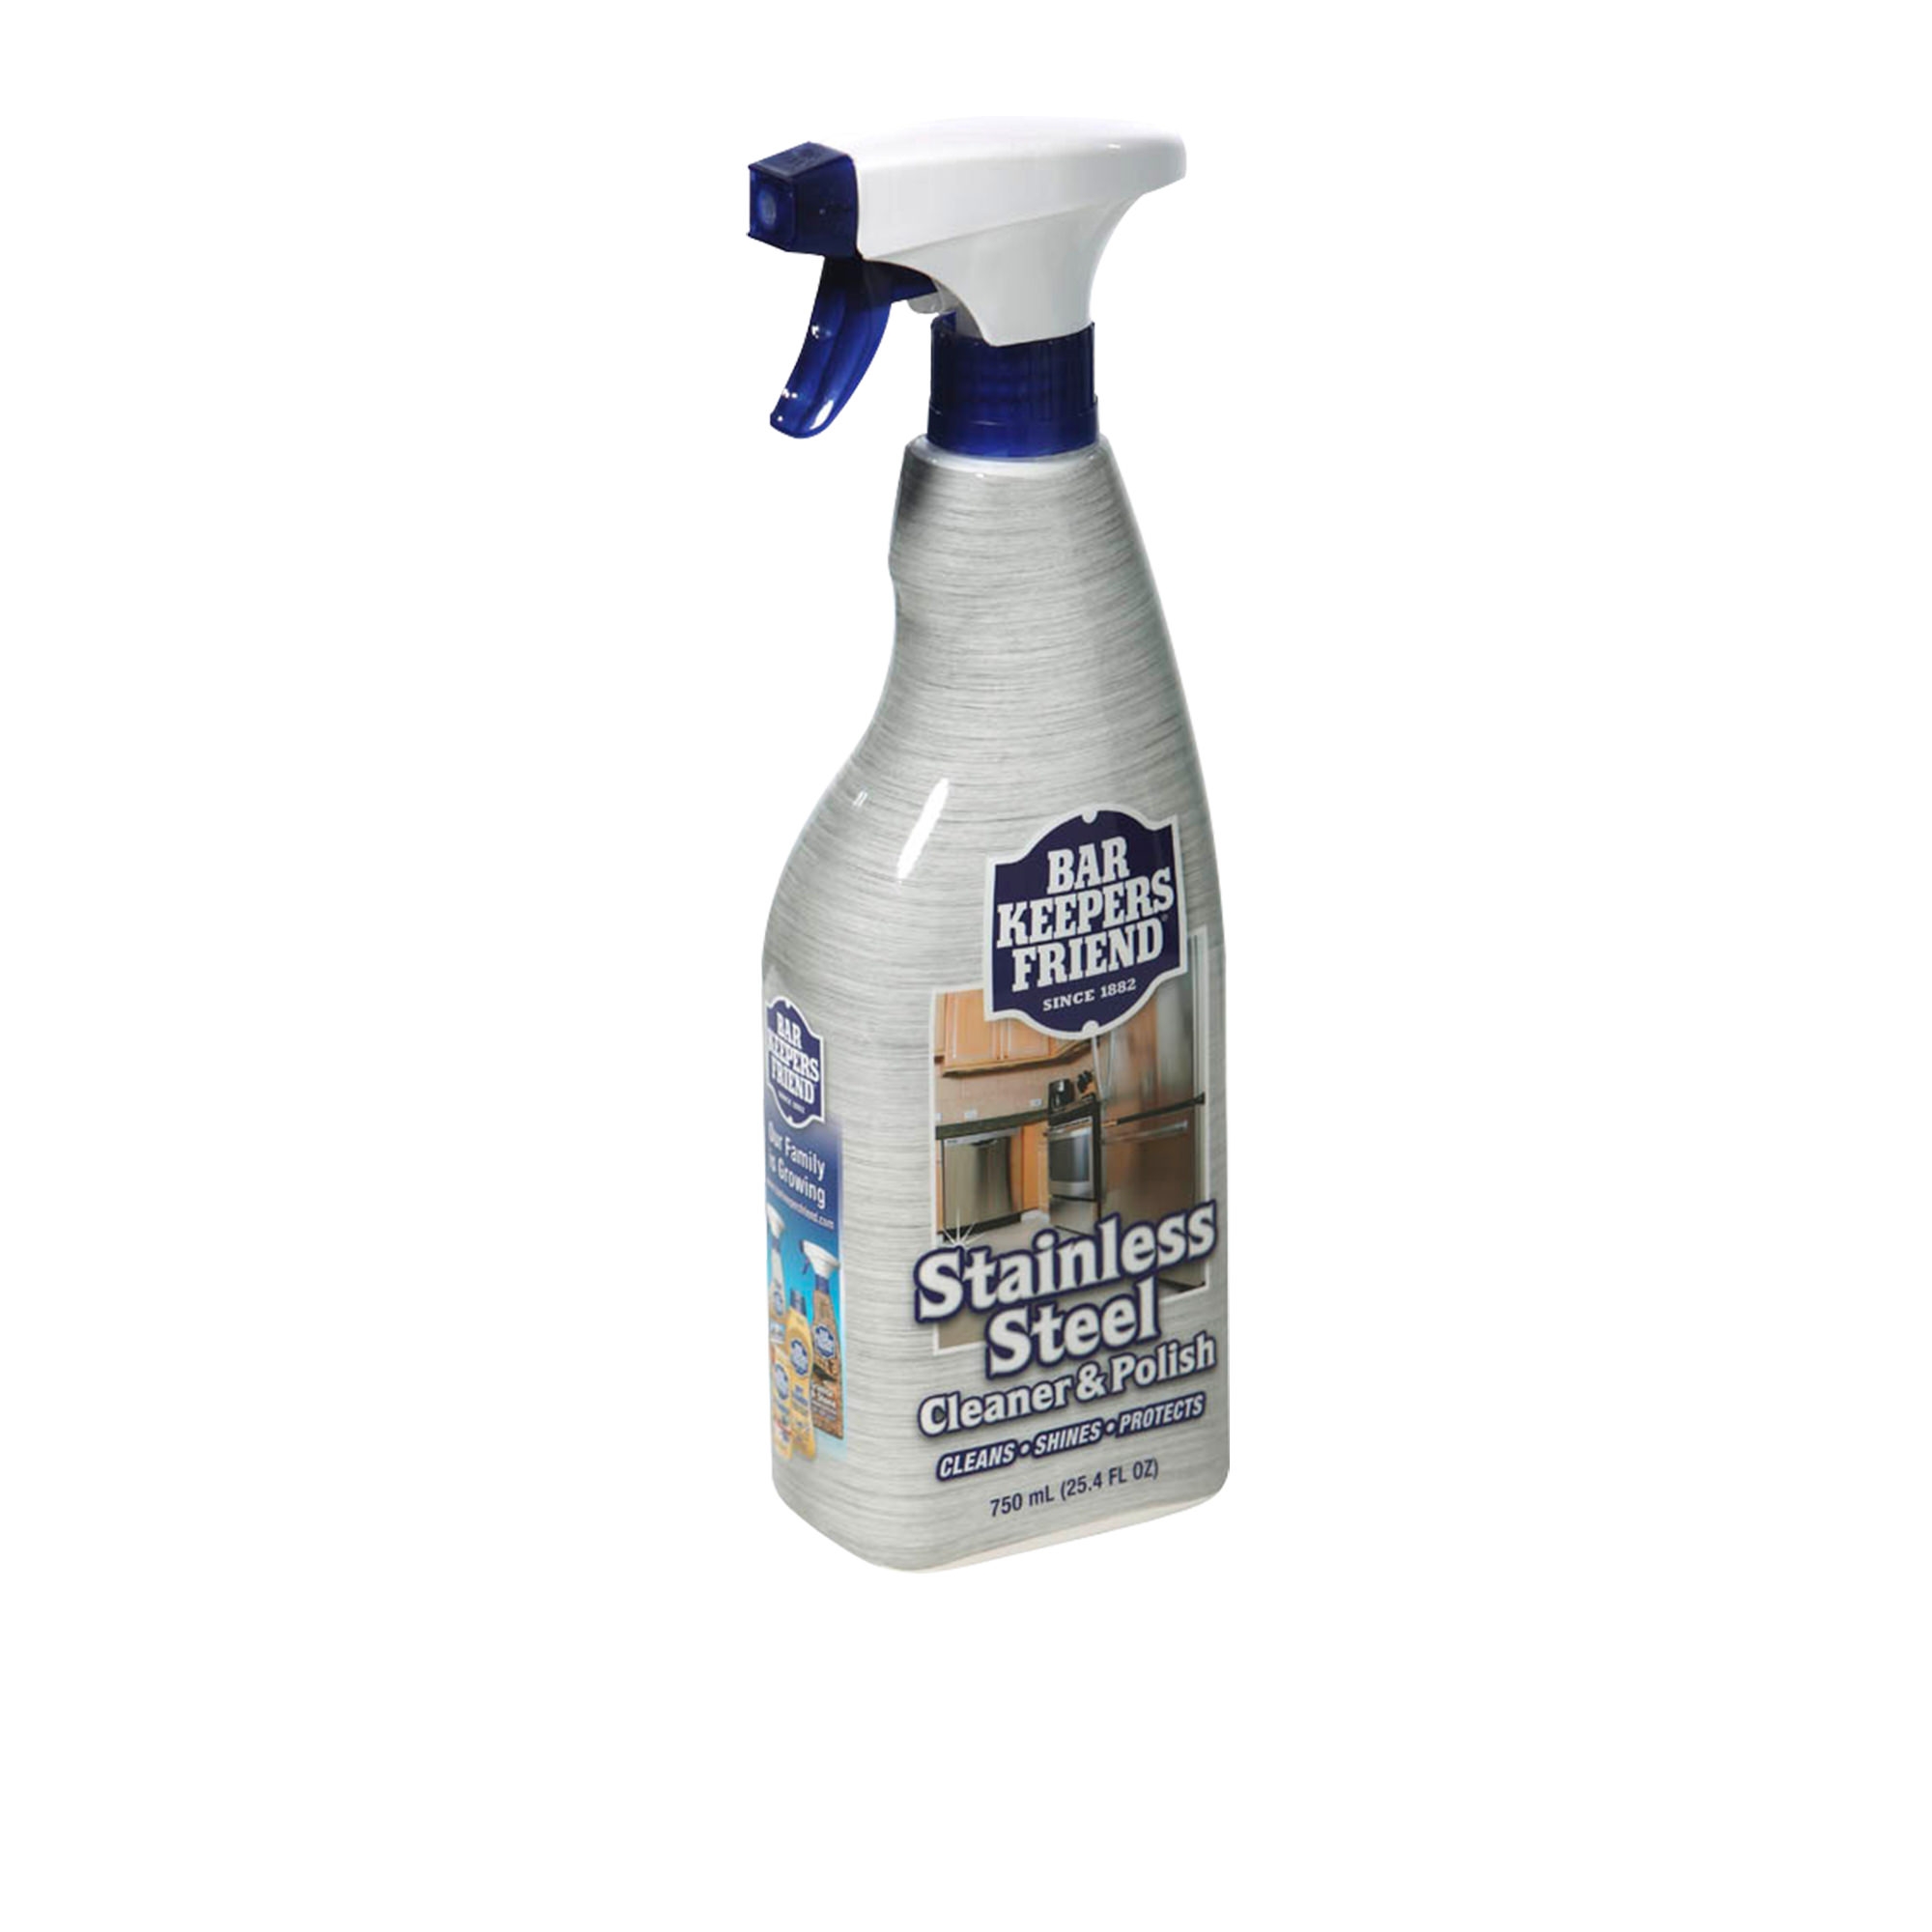 Bar Keepers Friend Stainless Steel Cleaner & Polish Spray 750ml Image 2